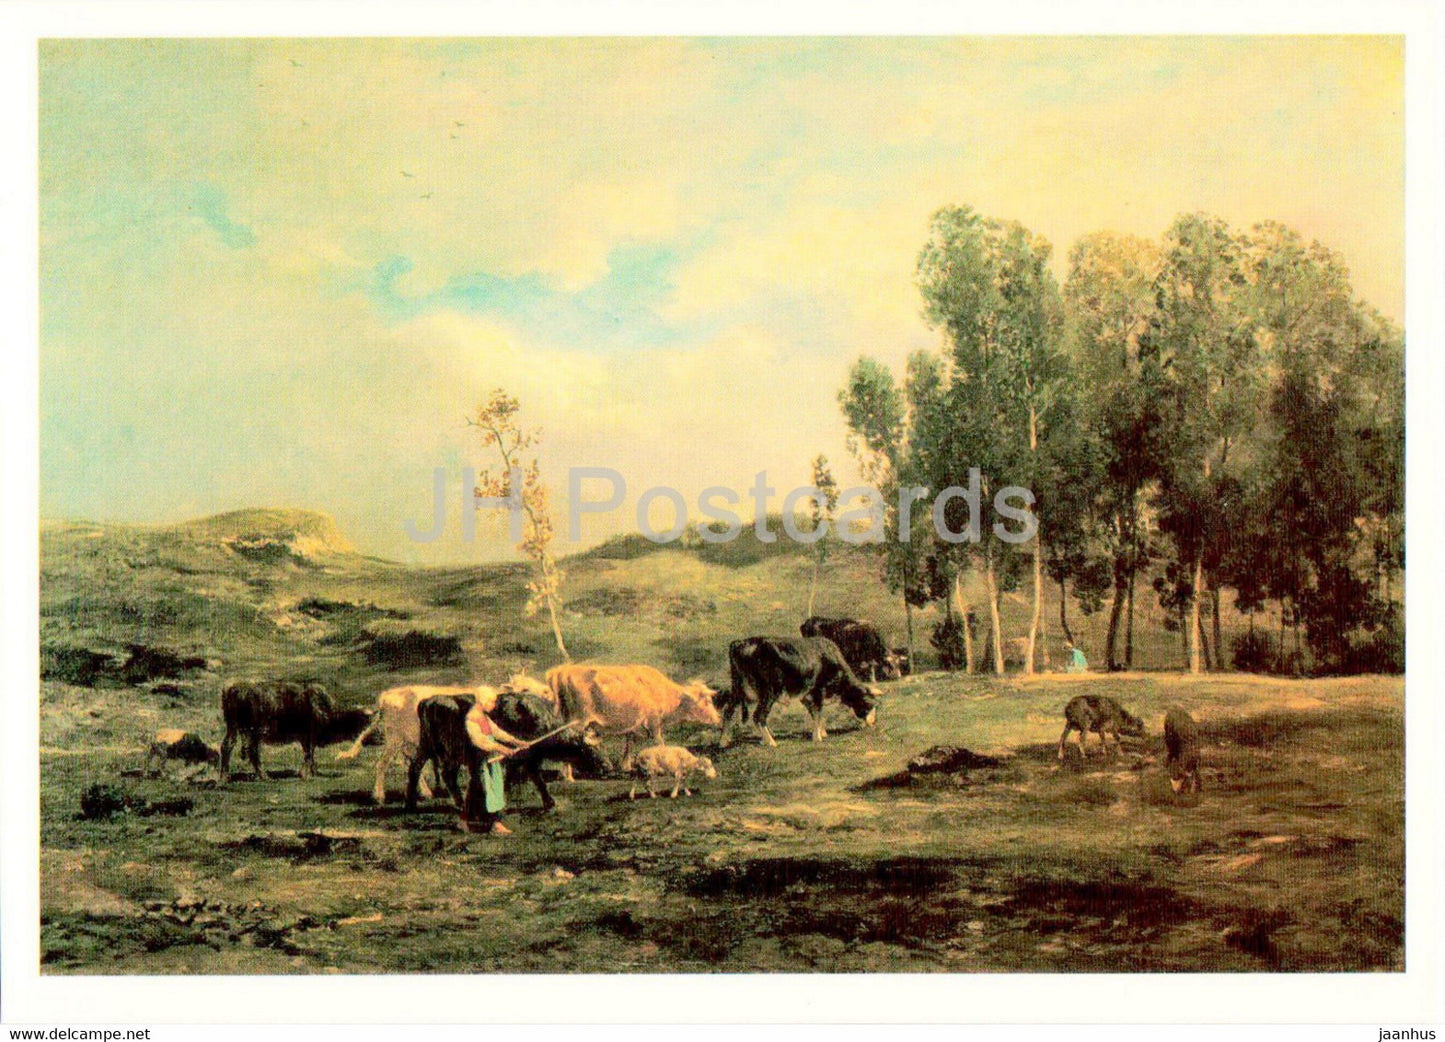 painting by Charles Emile Jacque - Shepherdess with herd in the field - cow - French art - 1983 - Russia USSR - unused - JH Postcards